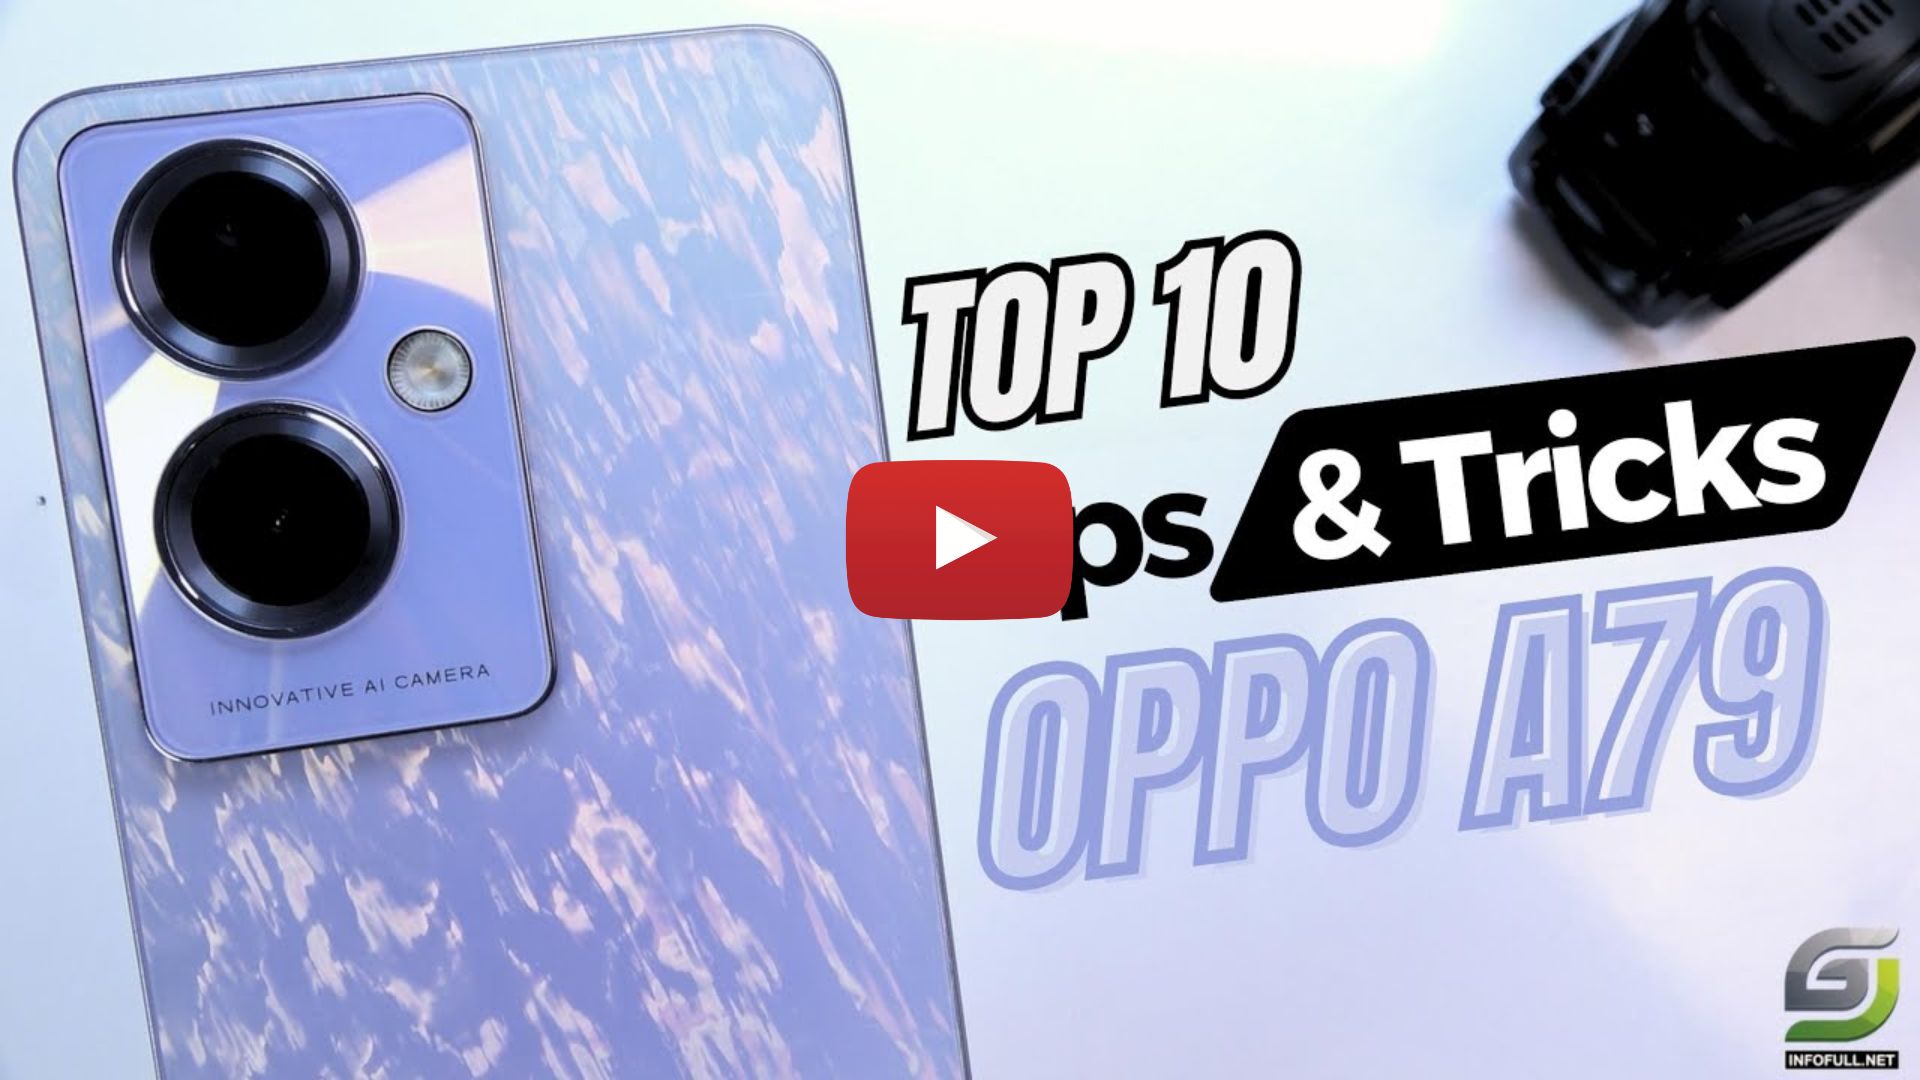 Top 10 Tips and Tricks Oppo A79 you need know - GSM FULL INFO %